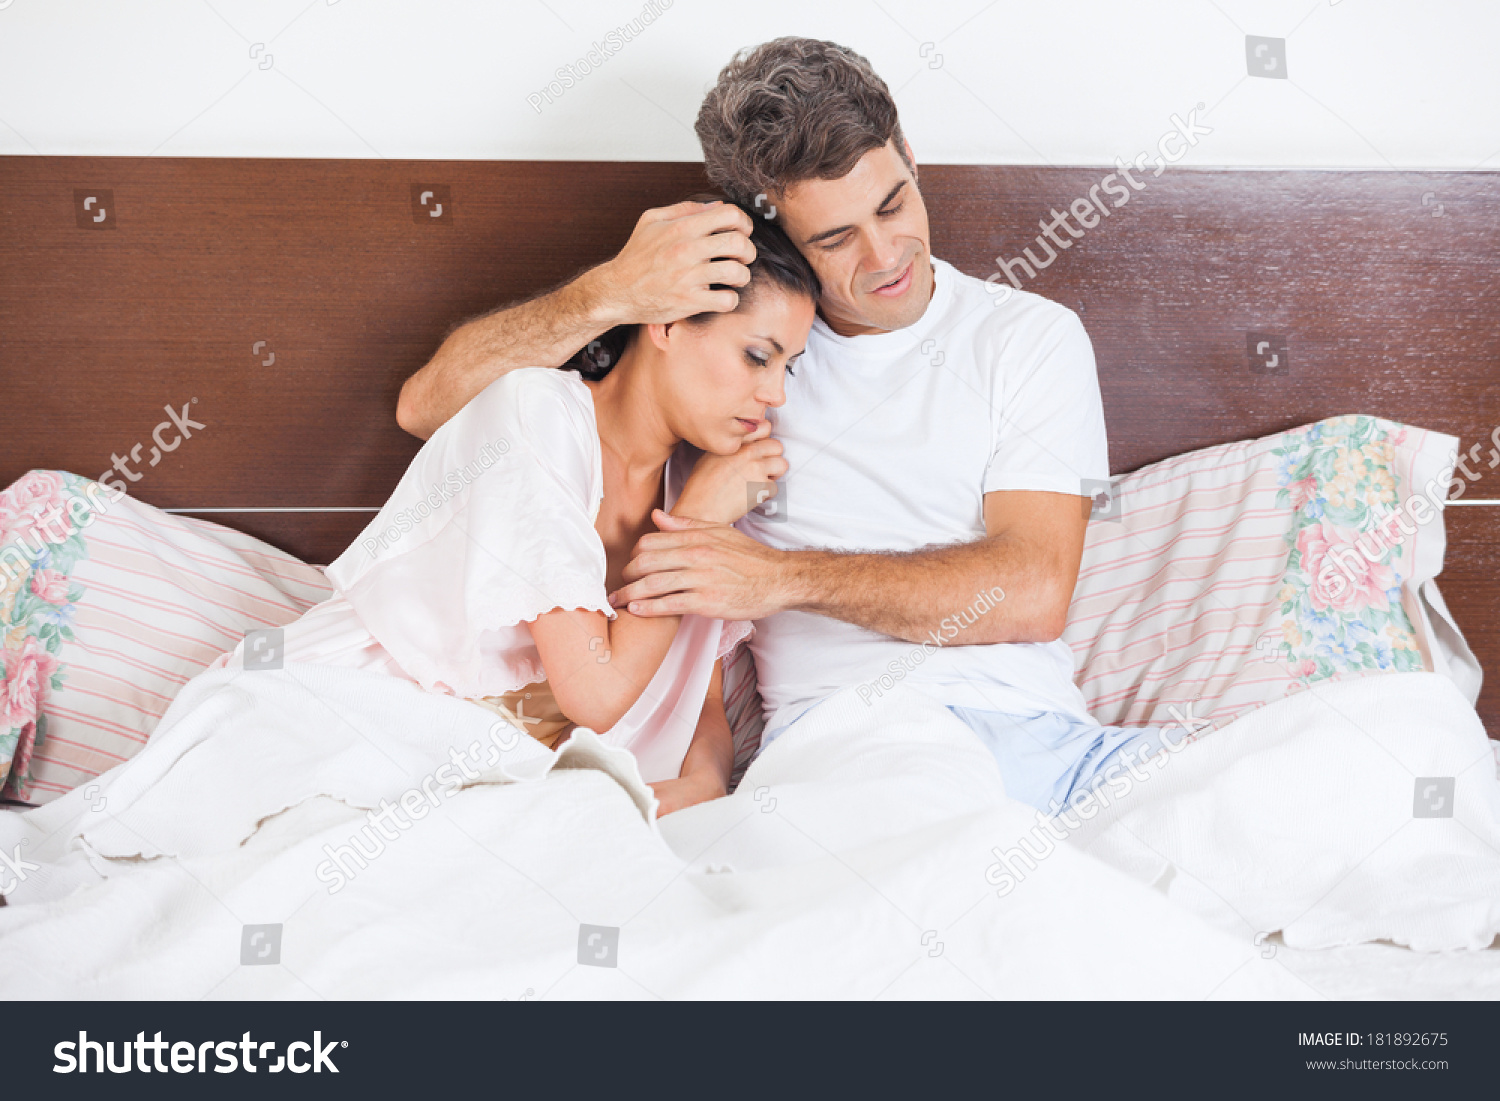 Man Consoles His Wife Lying Bed Stock Photo 181892675 Shutterstock